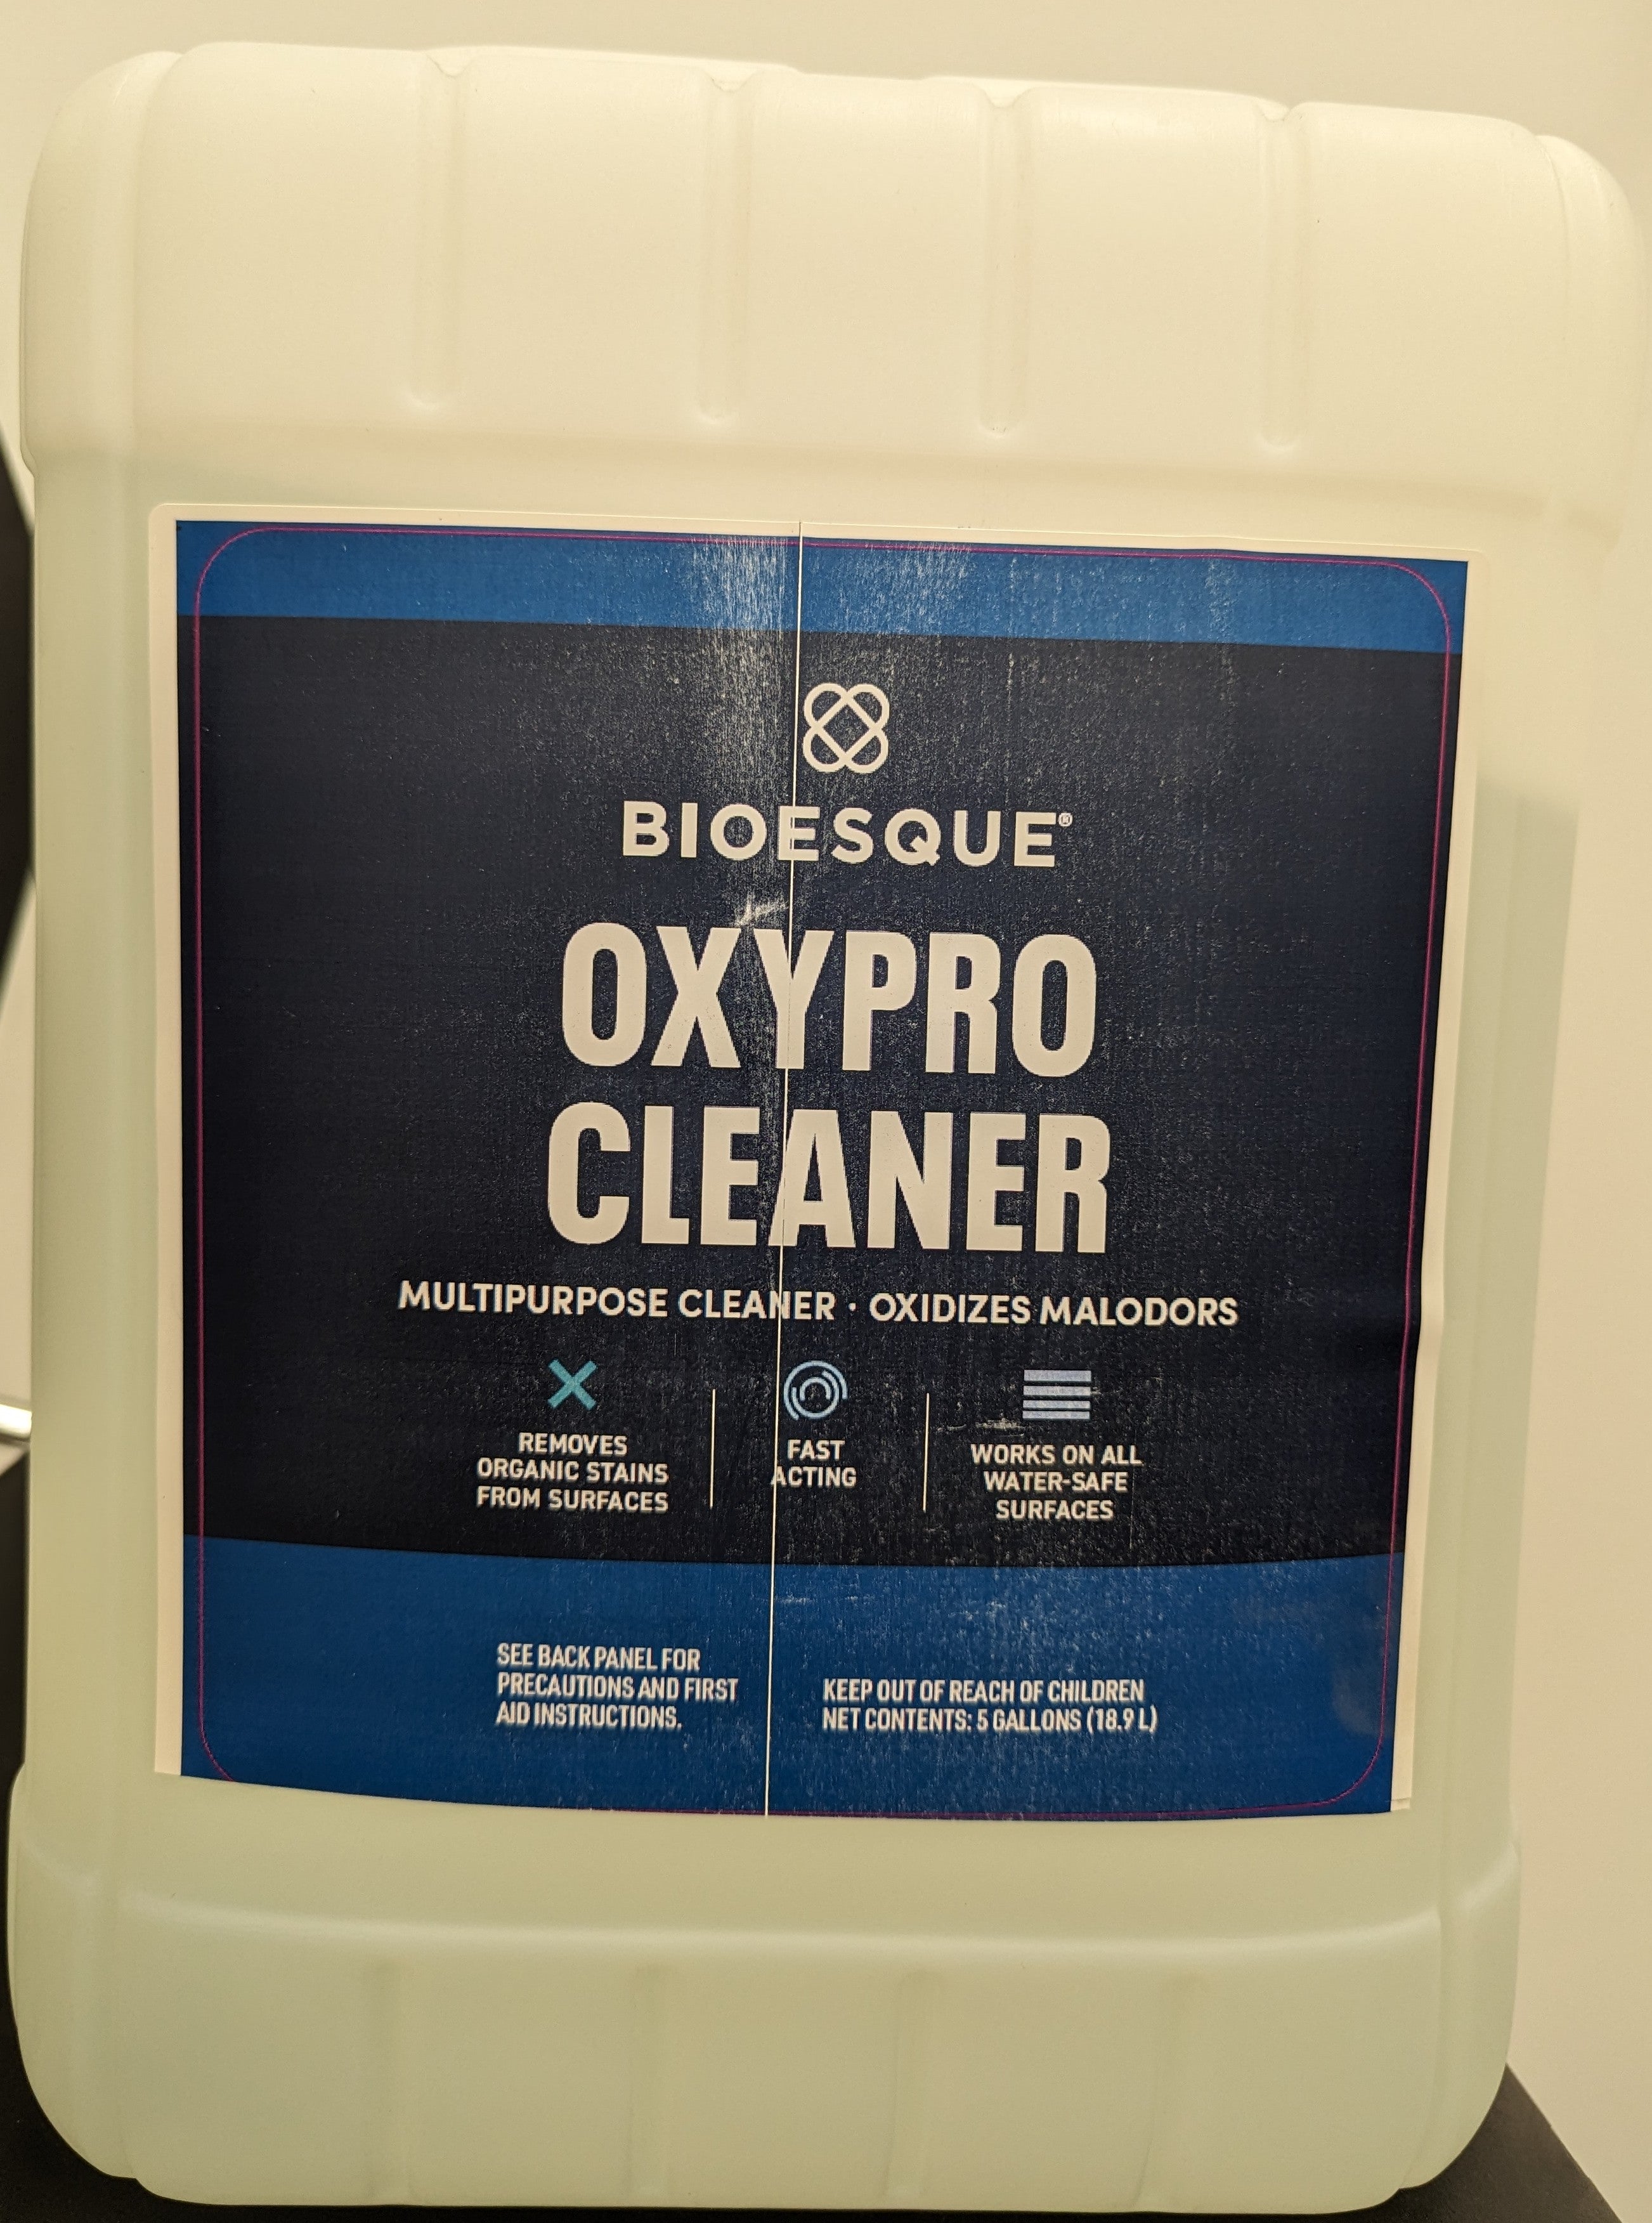 Bioesque Oxypro Cleaner 20% Hydrogen Peroxide 5 Gallon